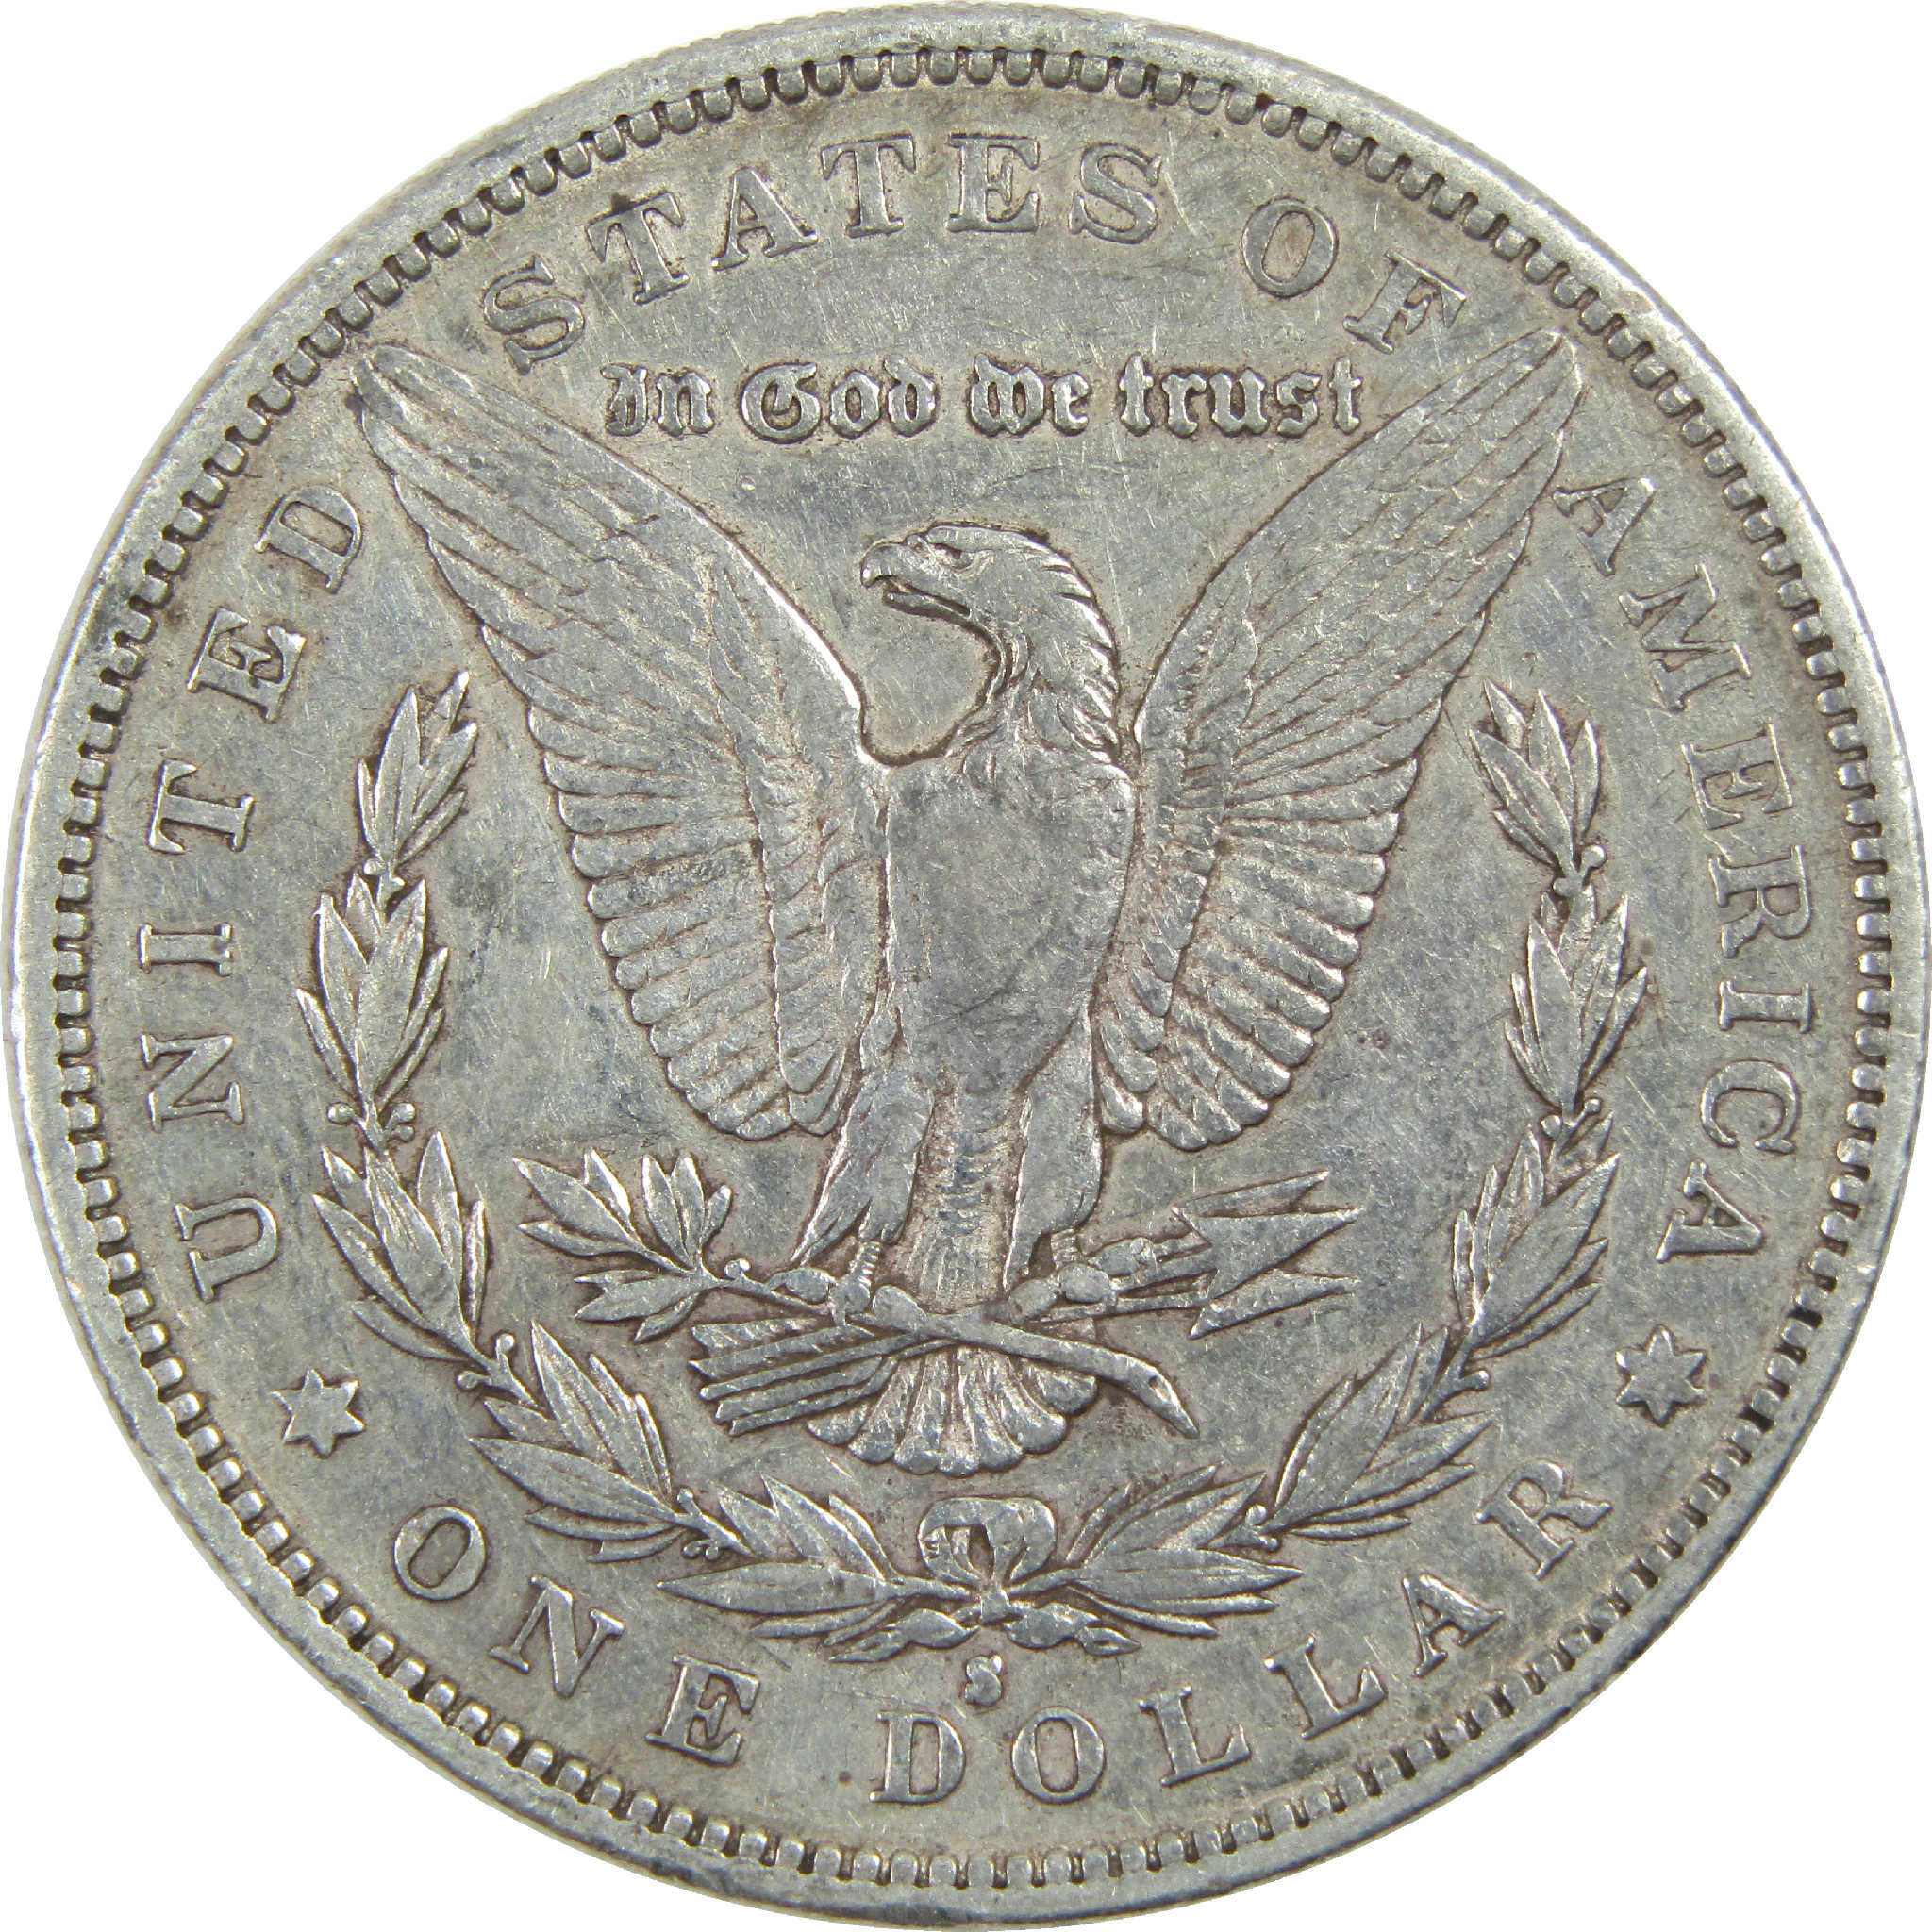 1883 S Morgan Dollar XF EF Extremely Fine Silver $1 Coin SKU:I13228 - Morgan coin - Morgan silver dollar - Morgan silver dollar for sale - Profile Coins &amp; Collectibles